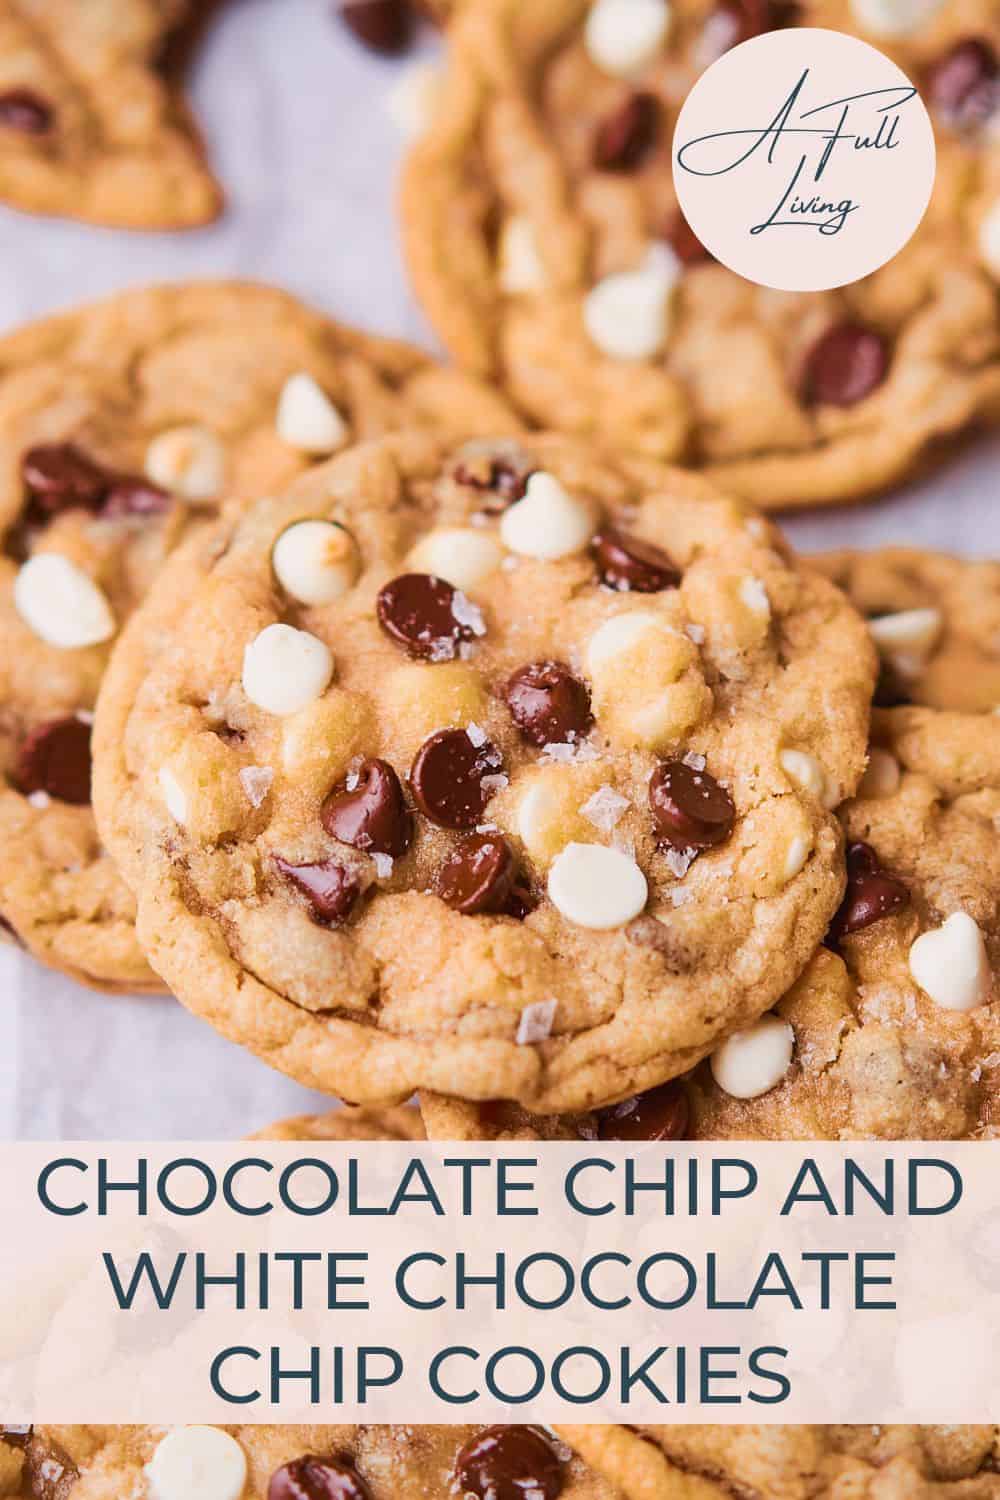 Chocolate Chip and White Chocolate Chip Cookies